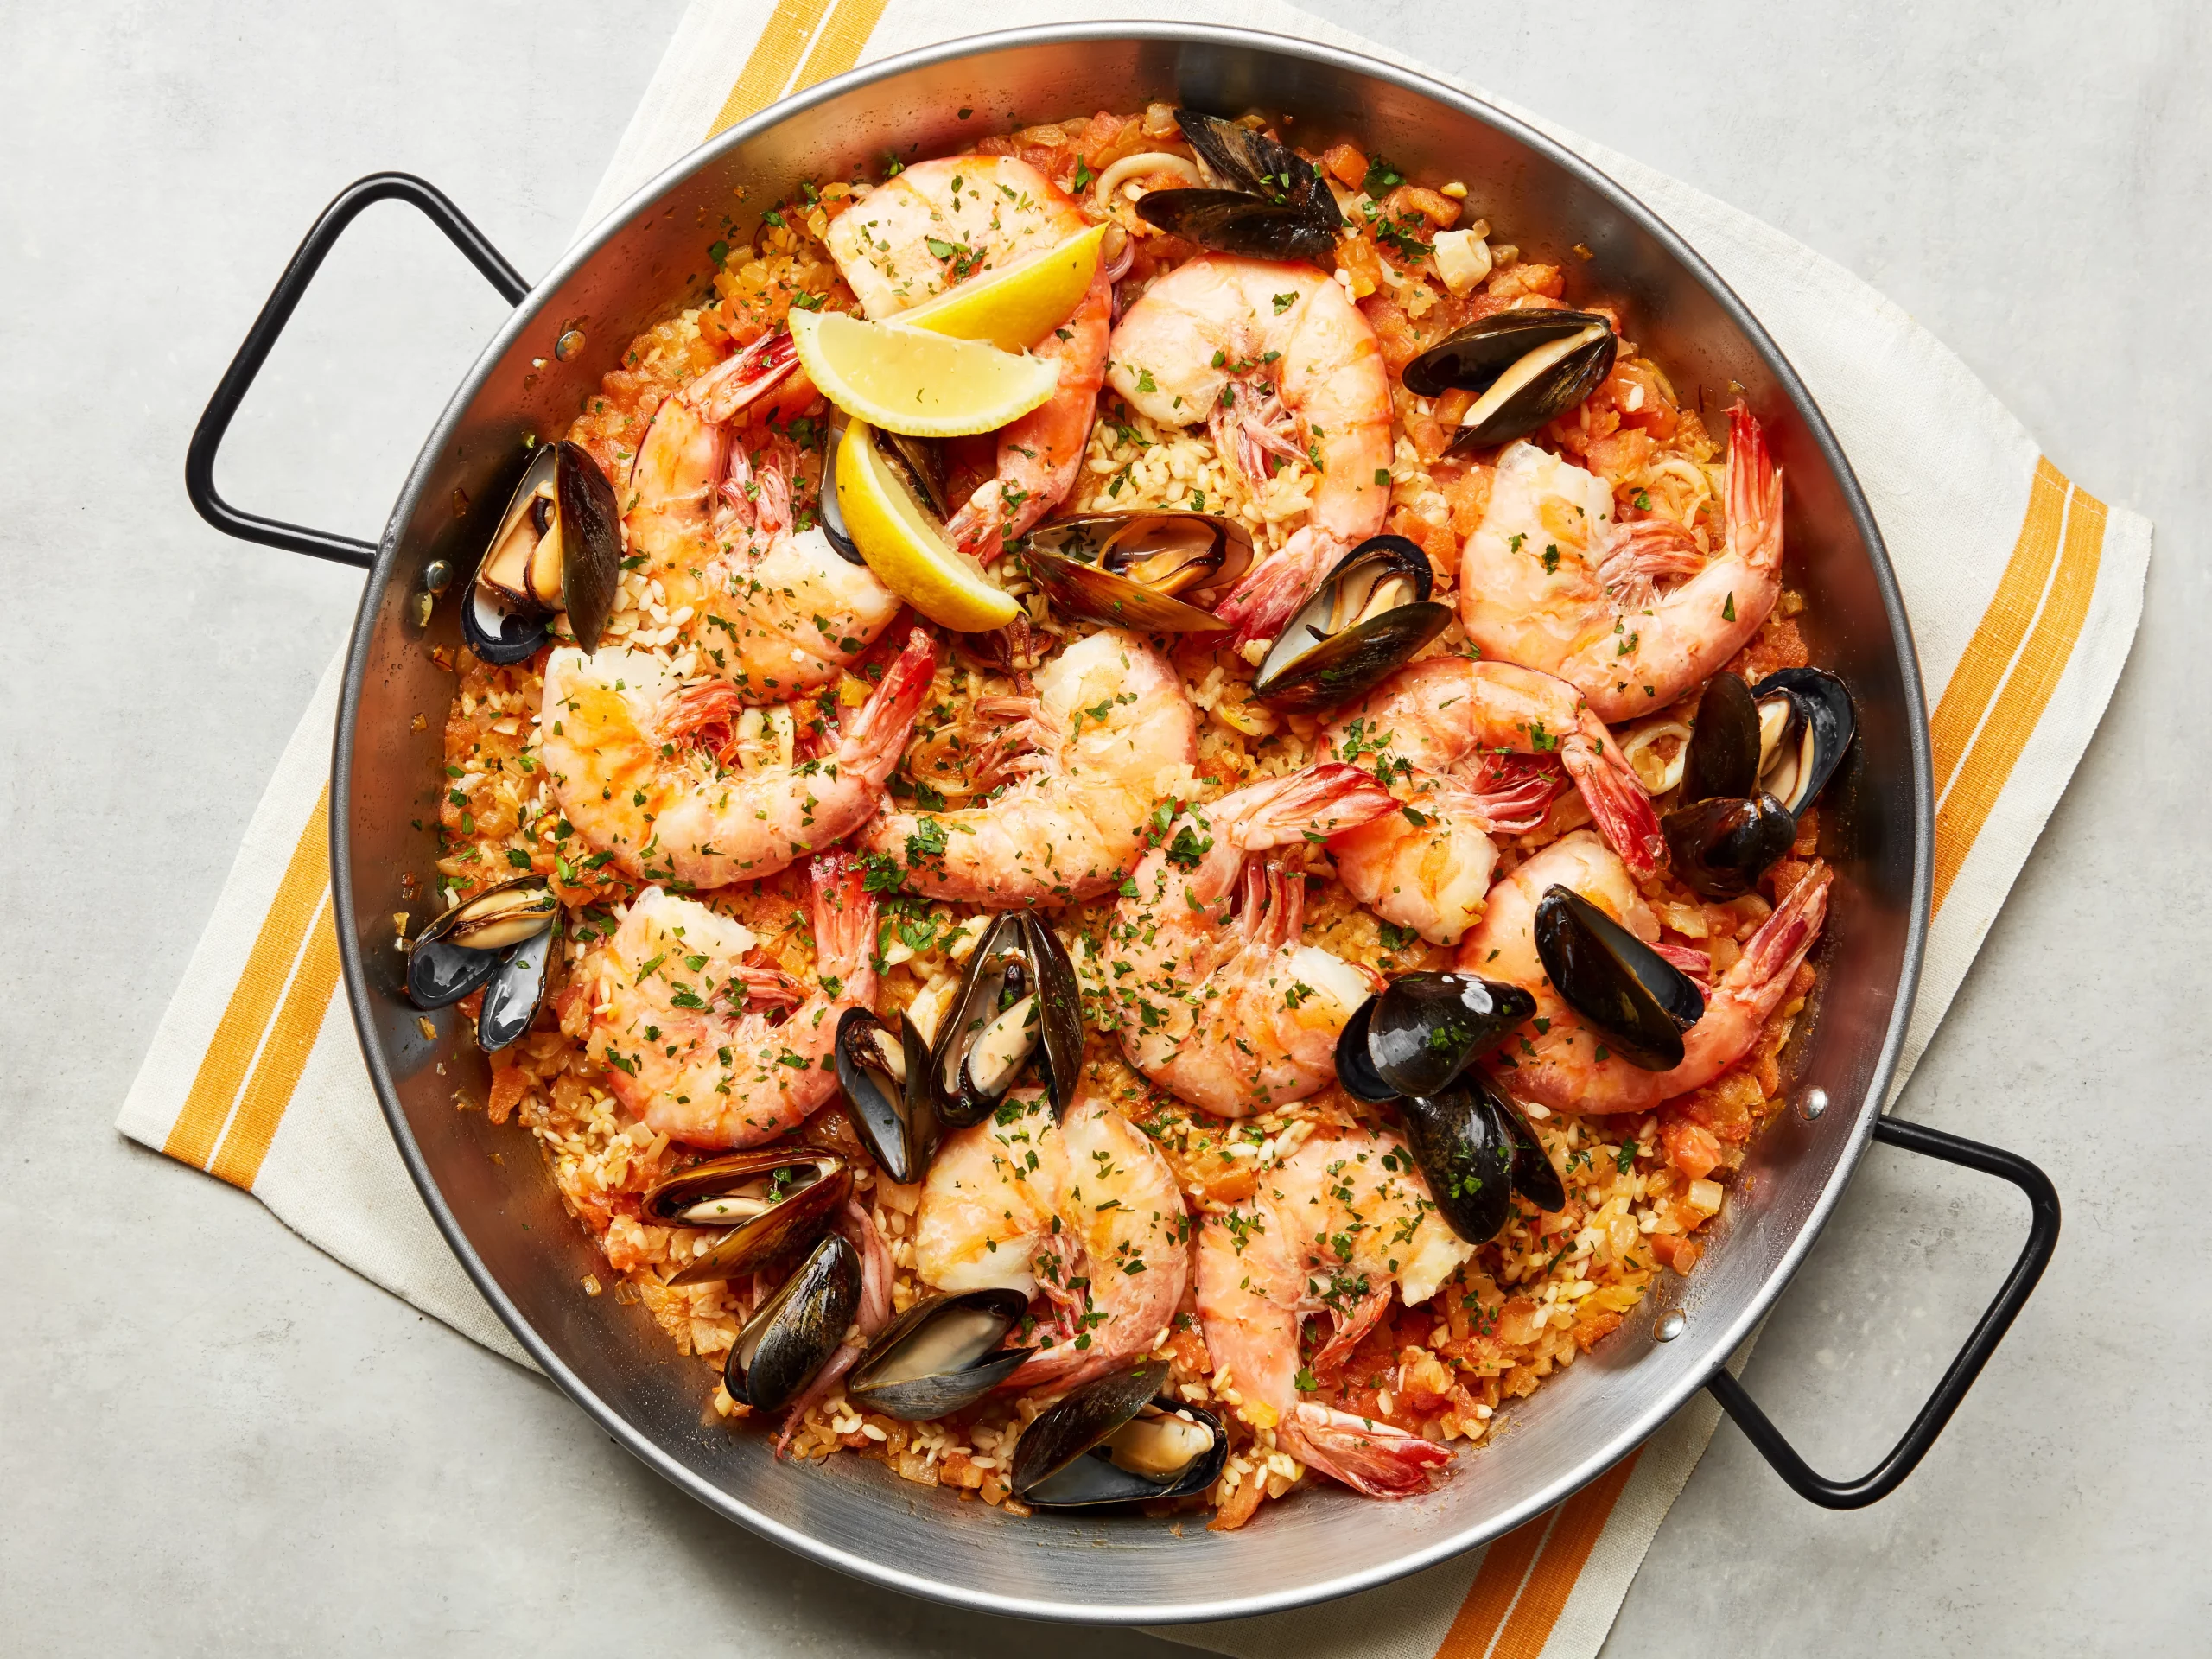 Plated seafood paella garnished with lemon wedges and fresh herbs, ready to be served and enjoyed with a glass of wine.